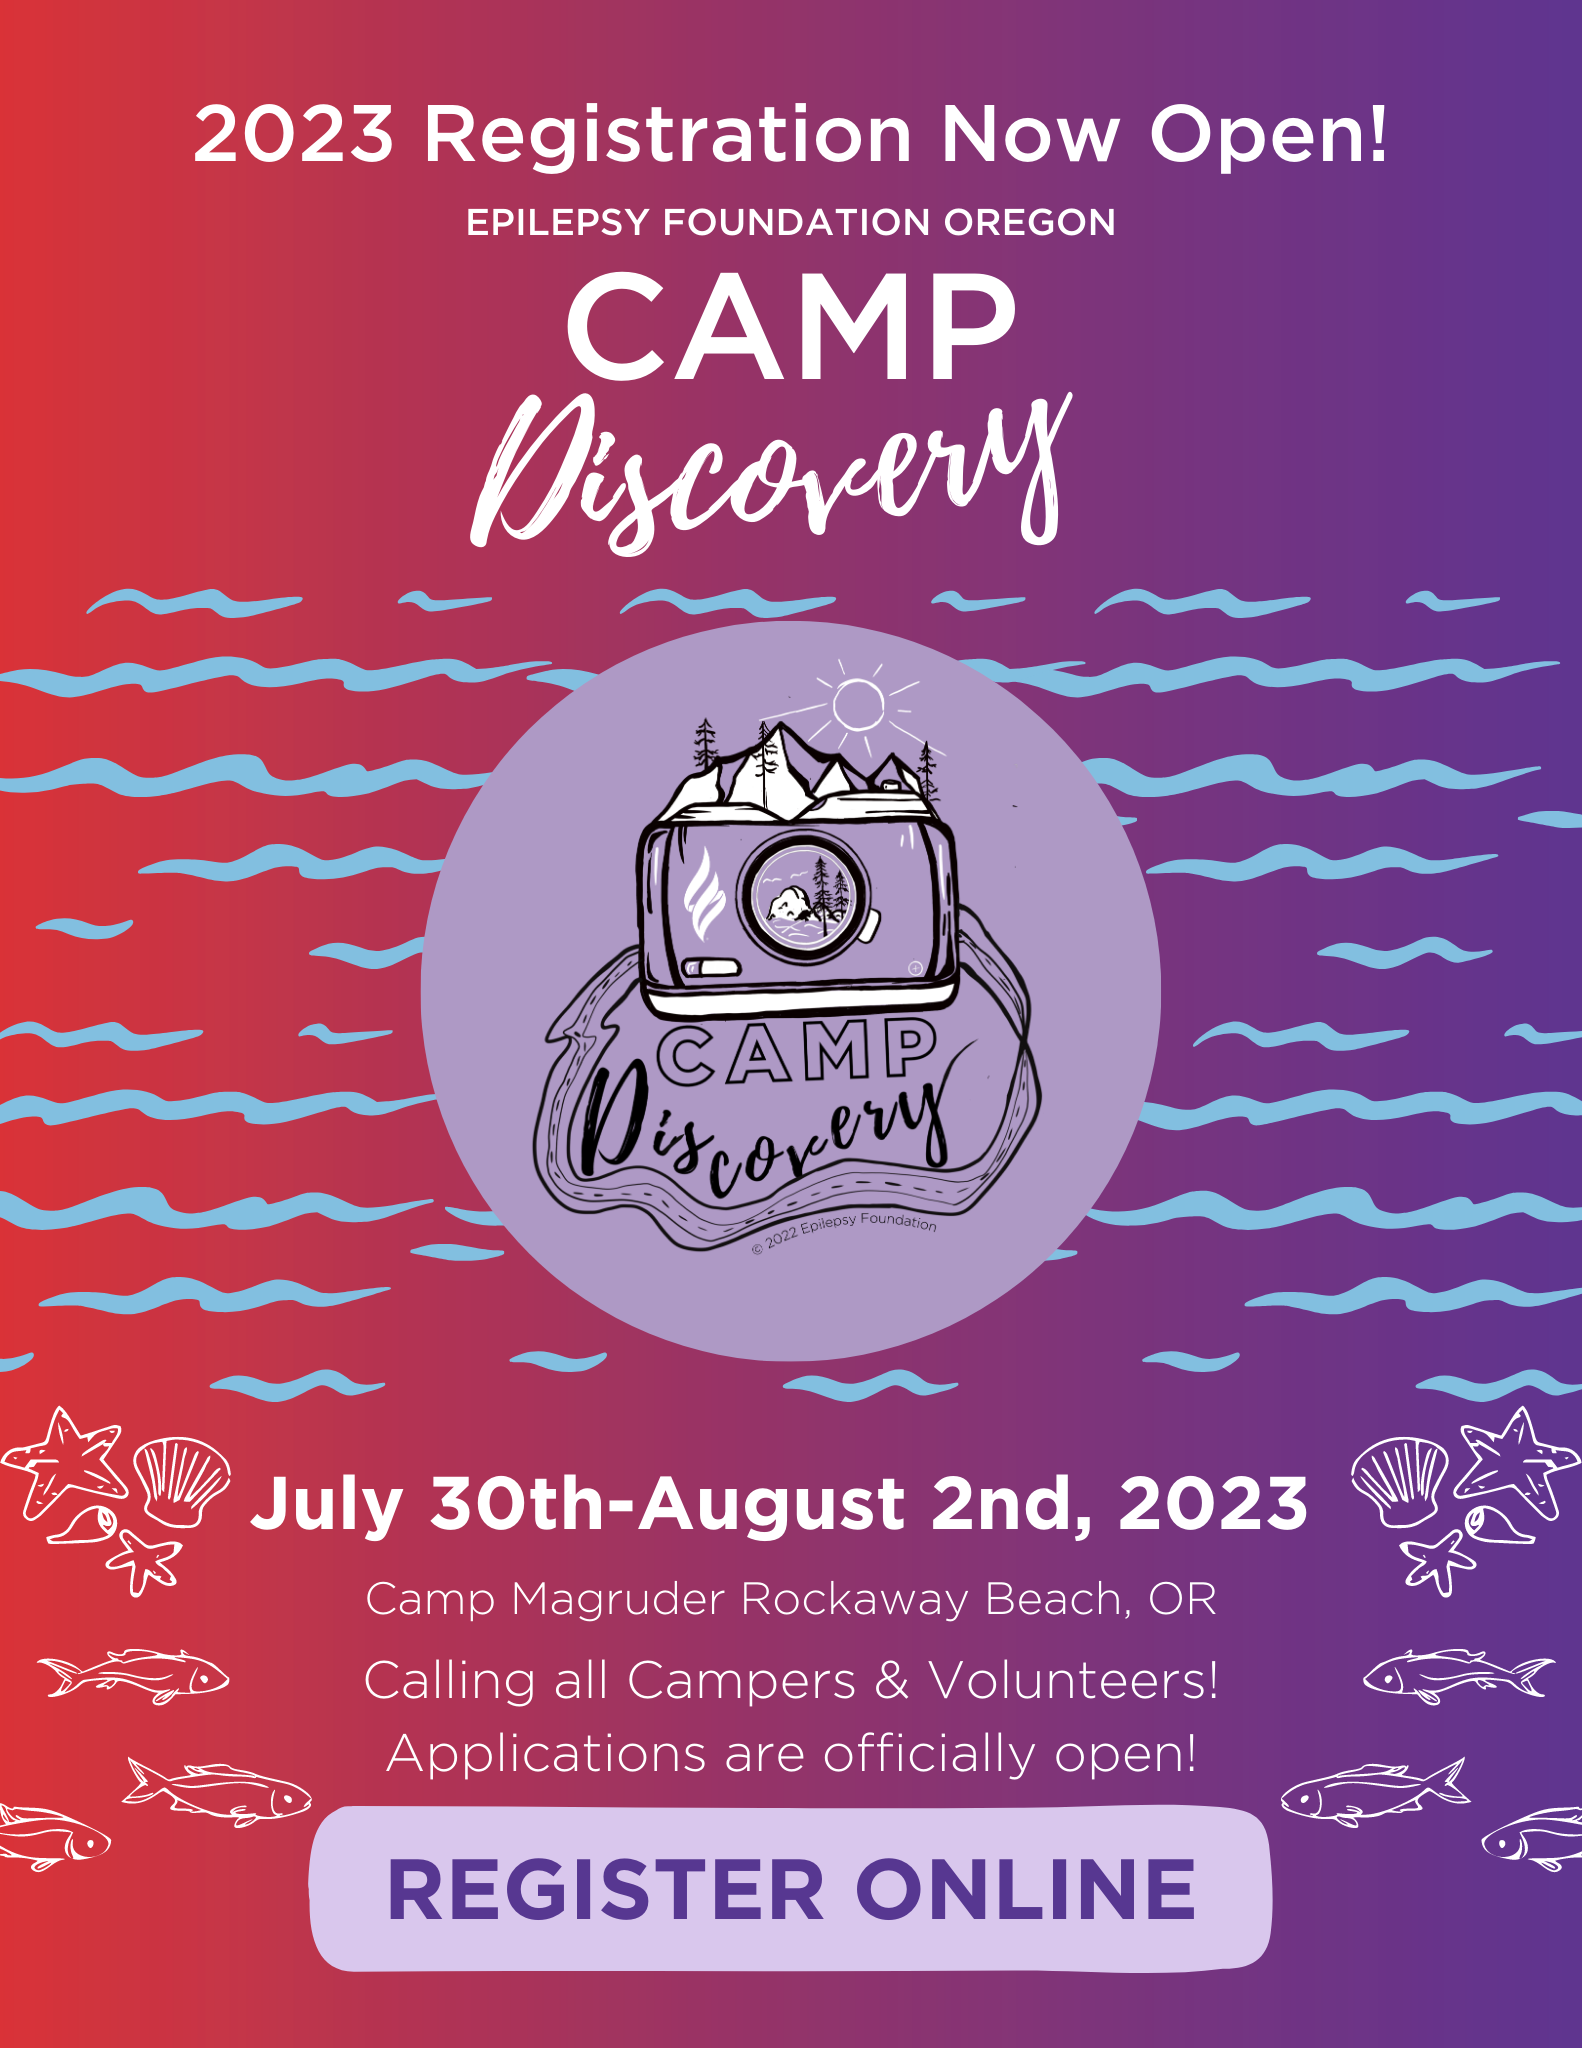 camp discovery date and information